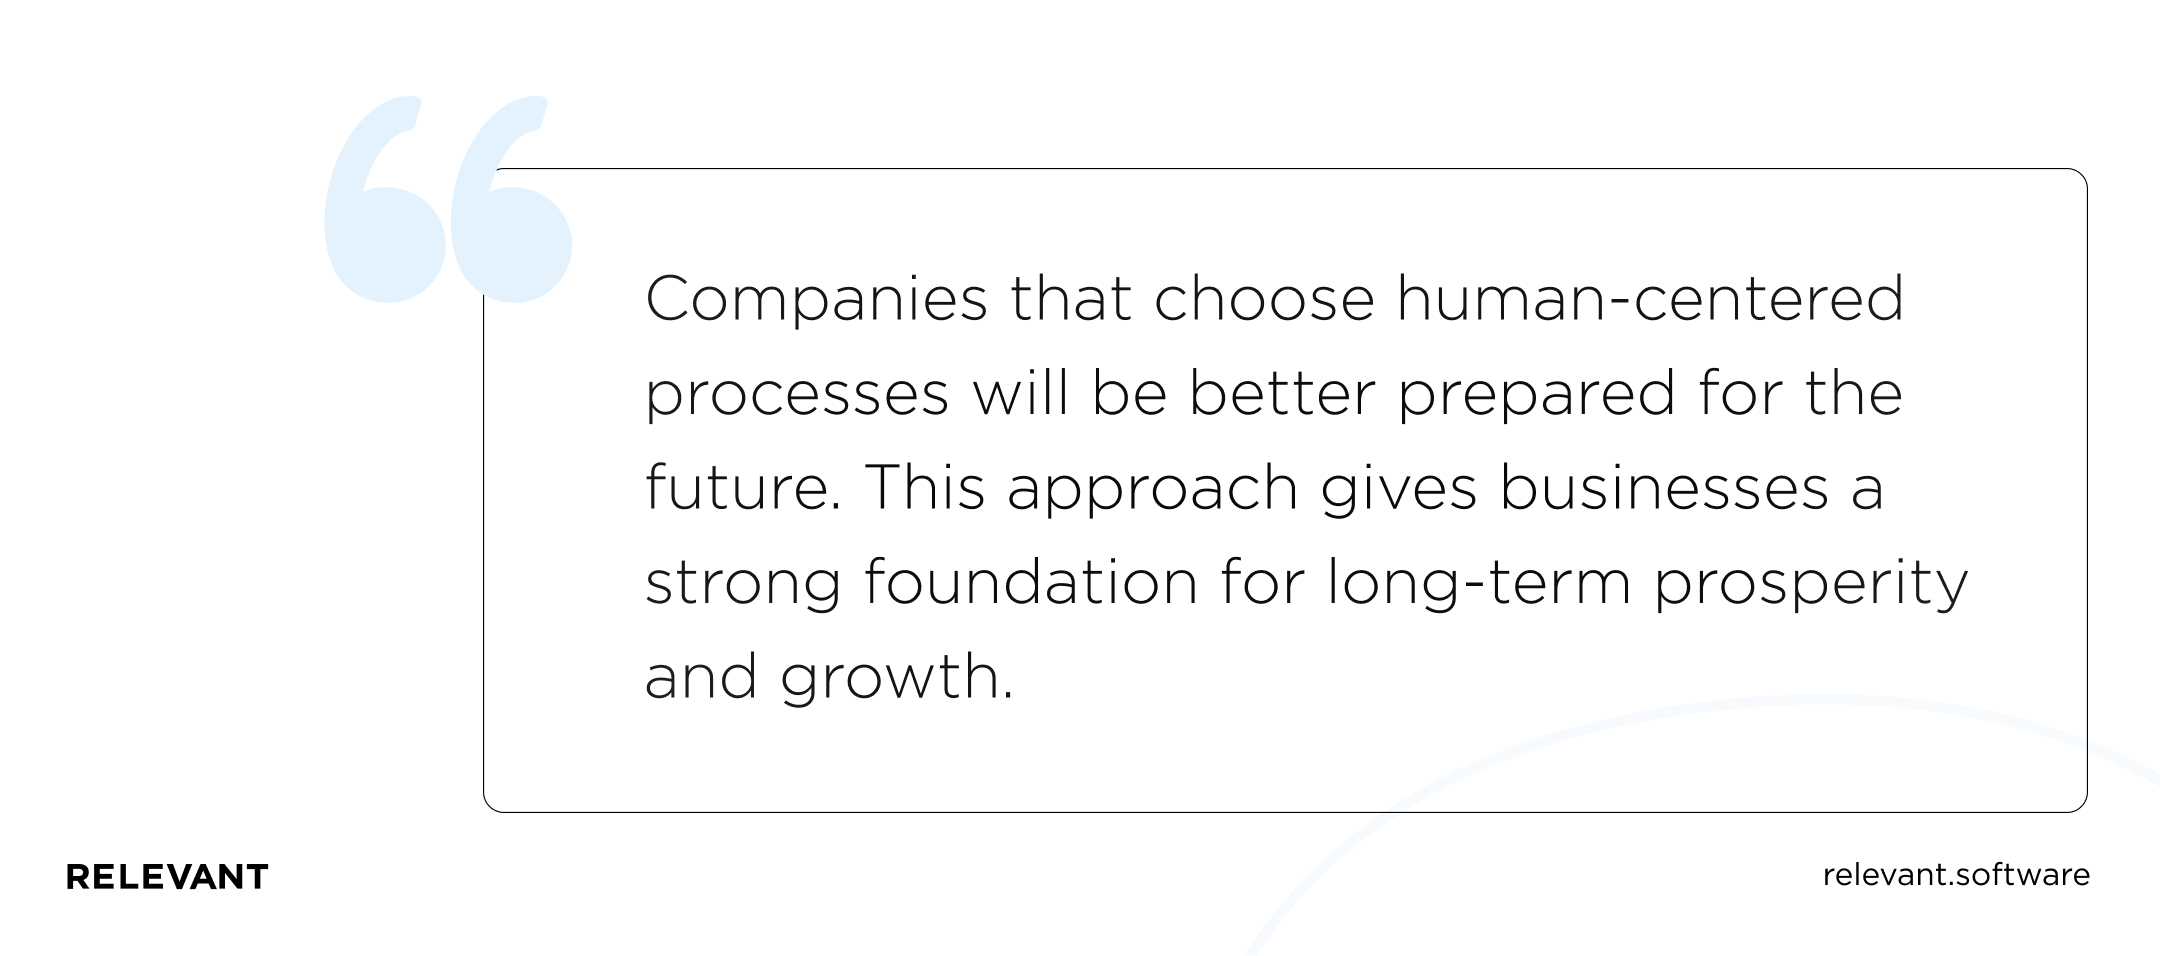 Companies that choose human-centered processes will be better prepared for the future. This approach gives businesses a strong foundation for long-term prosperity and growth.